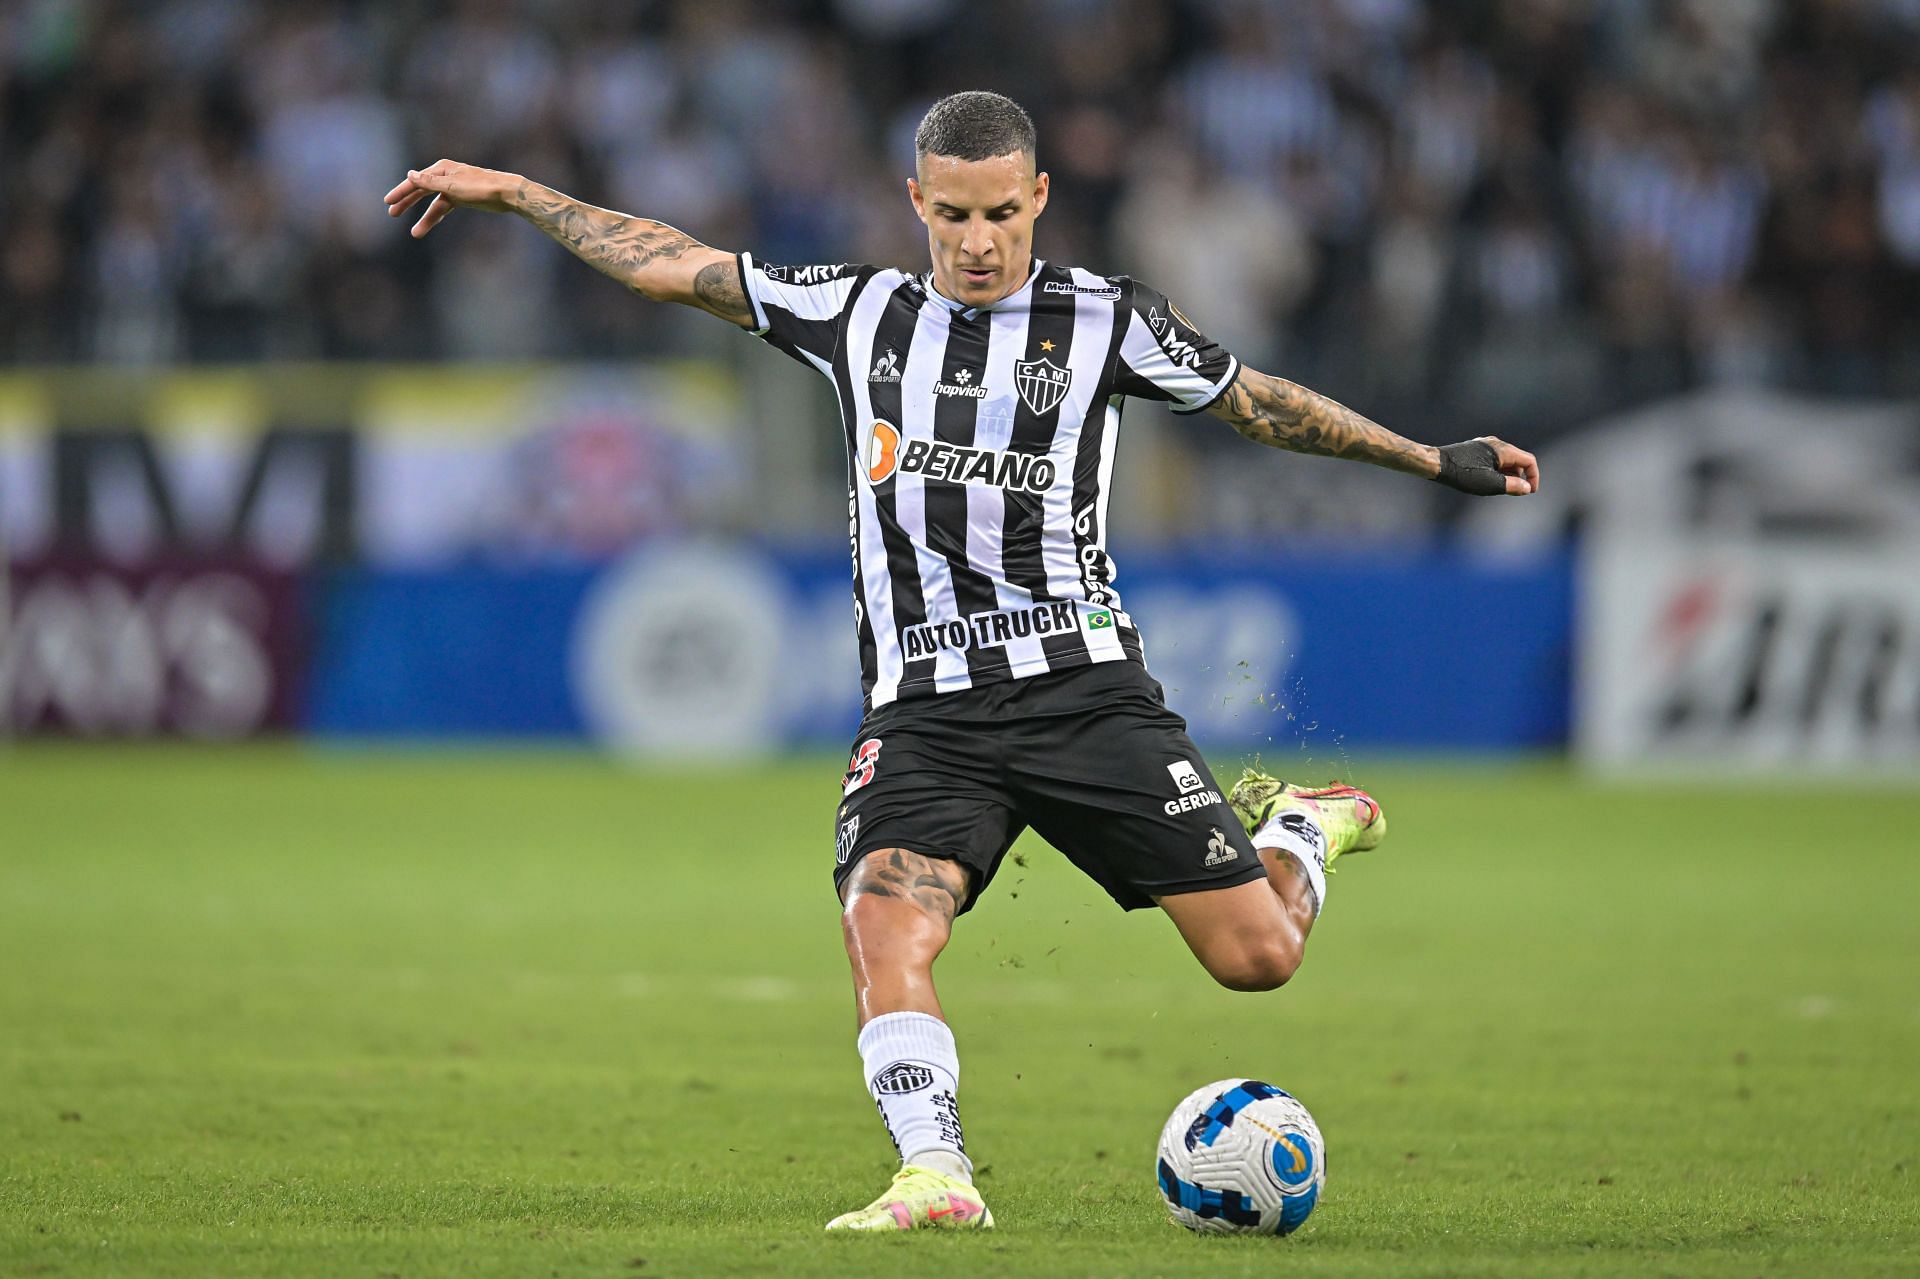 Atletico Mineiro face Fluminense in their upcoming Brazilian Serie A fixture on Wednesday